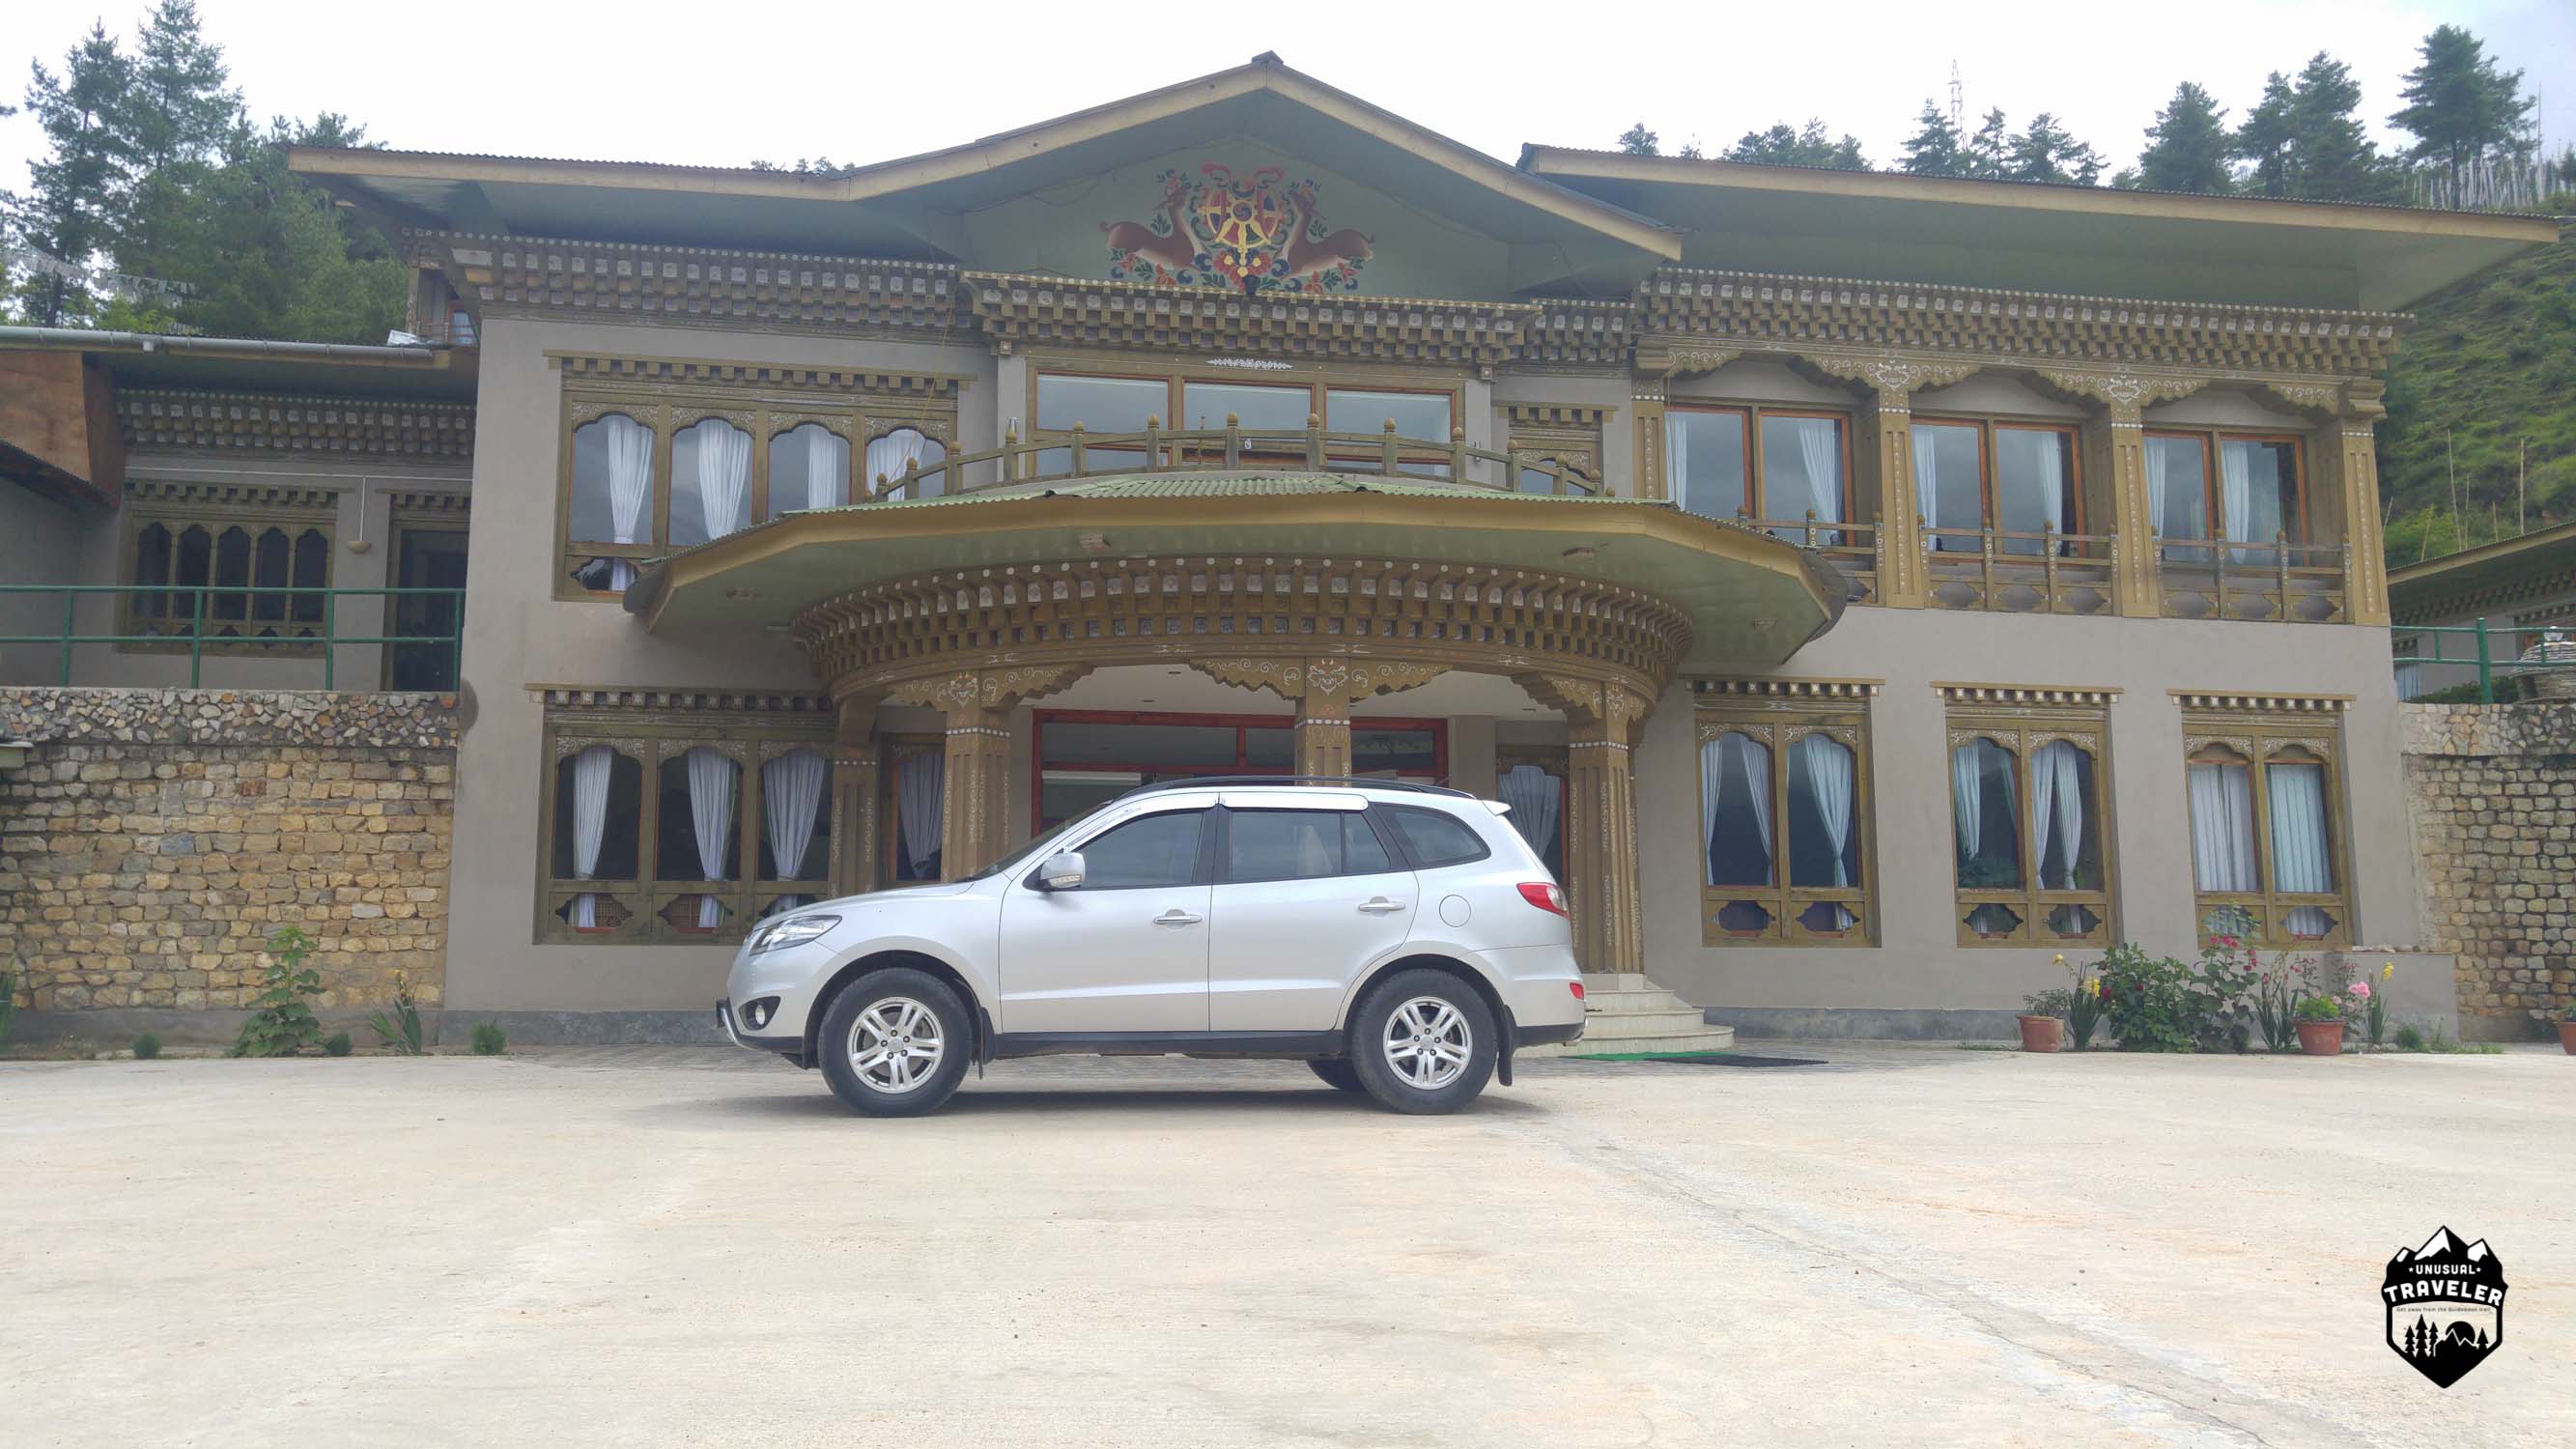 "My car" during my stay in front of my hotel in Paro (comes included with a guide)